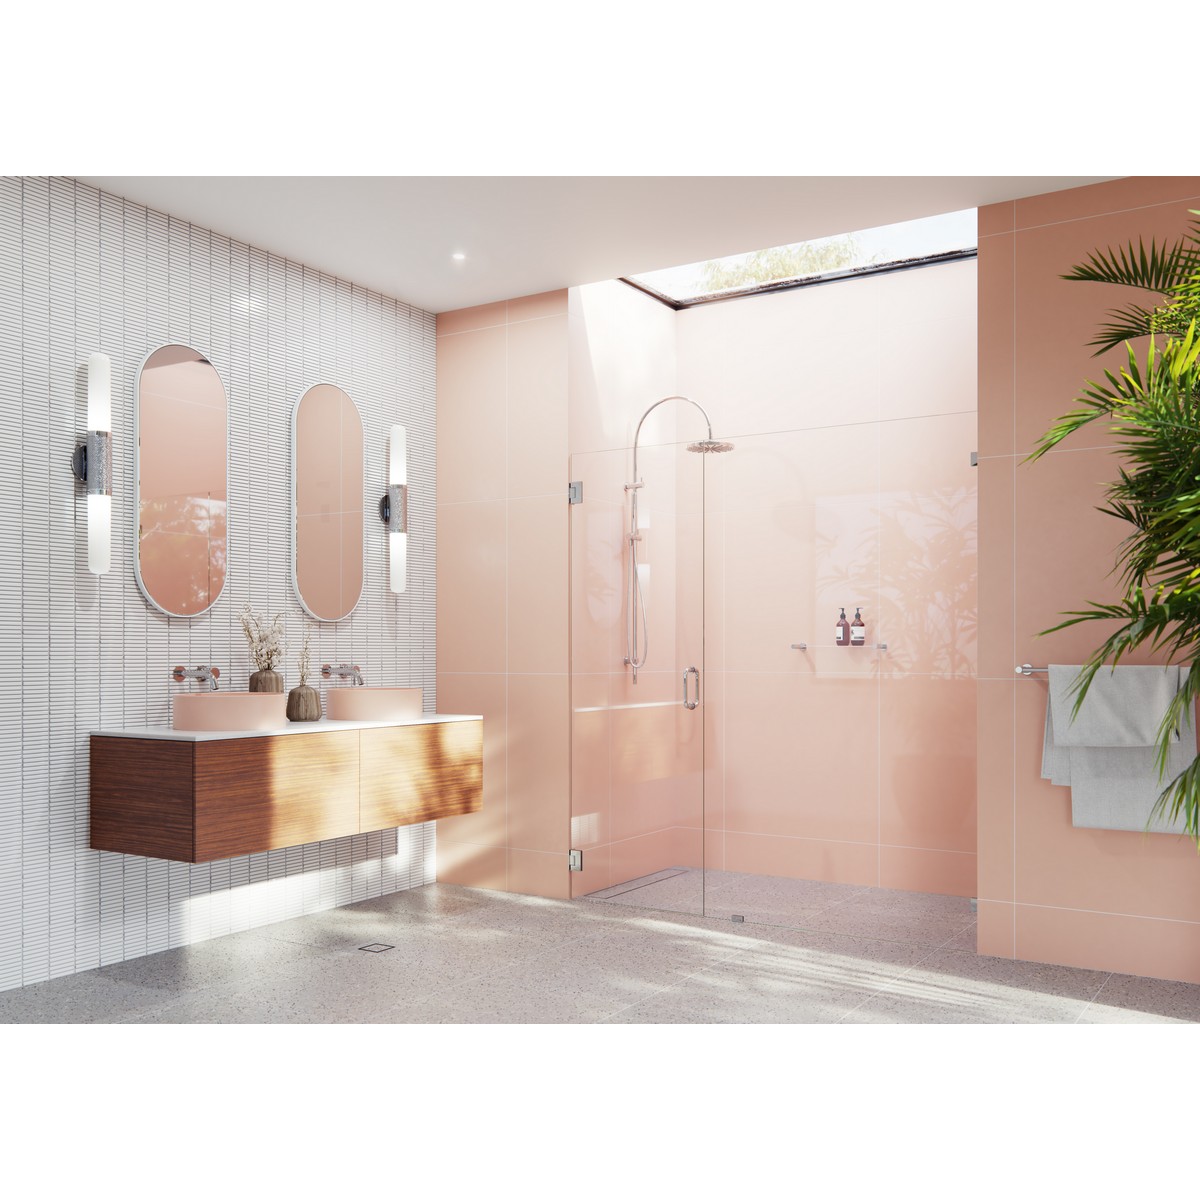 GLASS WAREHOUSE GW-WH-73.75 ILLUME 73 3/4 W X 78 H WALL HINGED FULLY FRAMELESS GLASS SHOWER ENCLOSURE